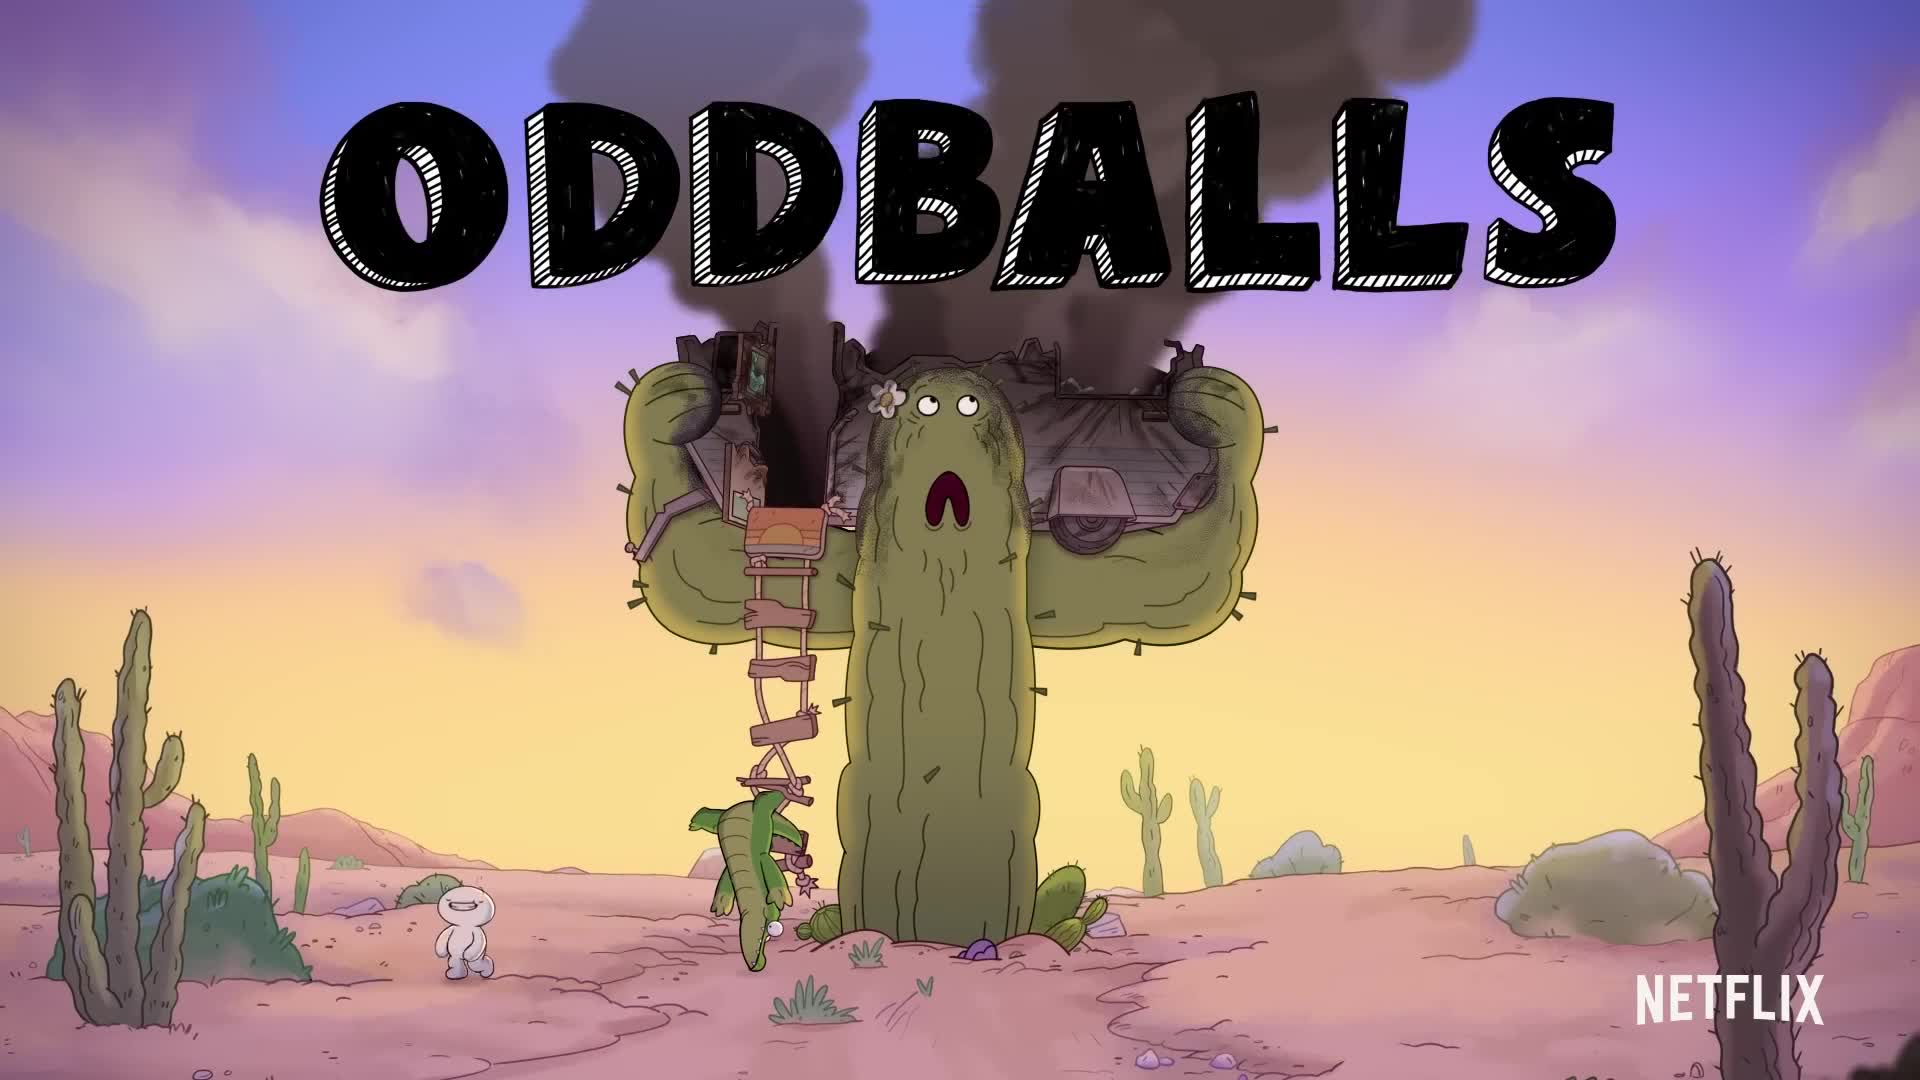 When Will Netflix's Oddballs Be Available?